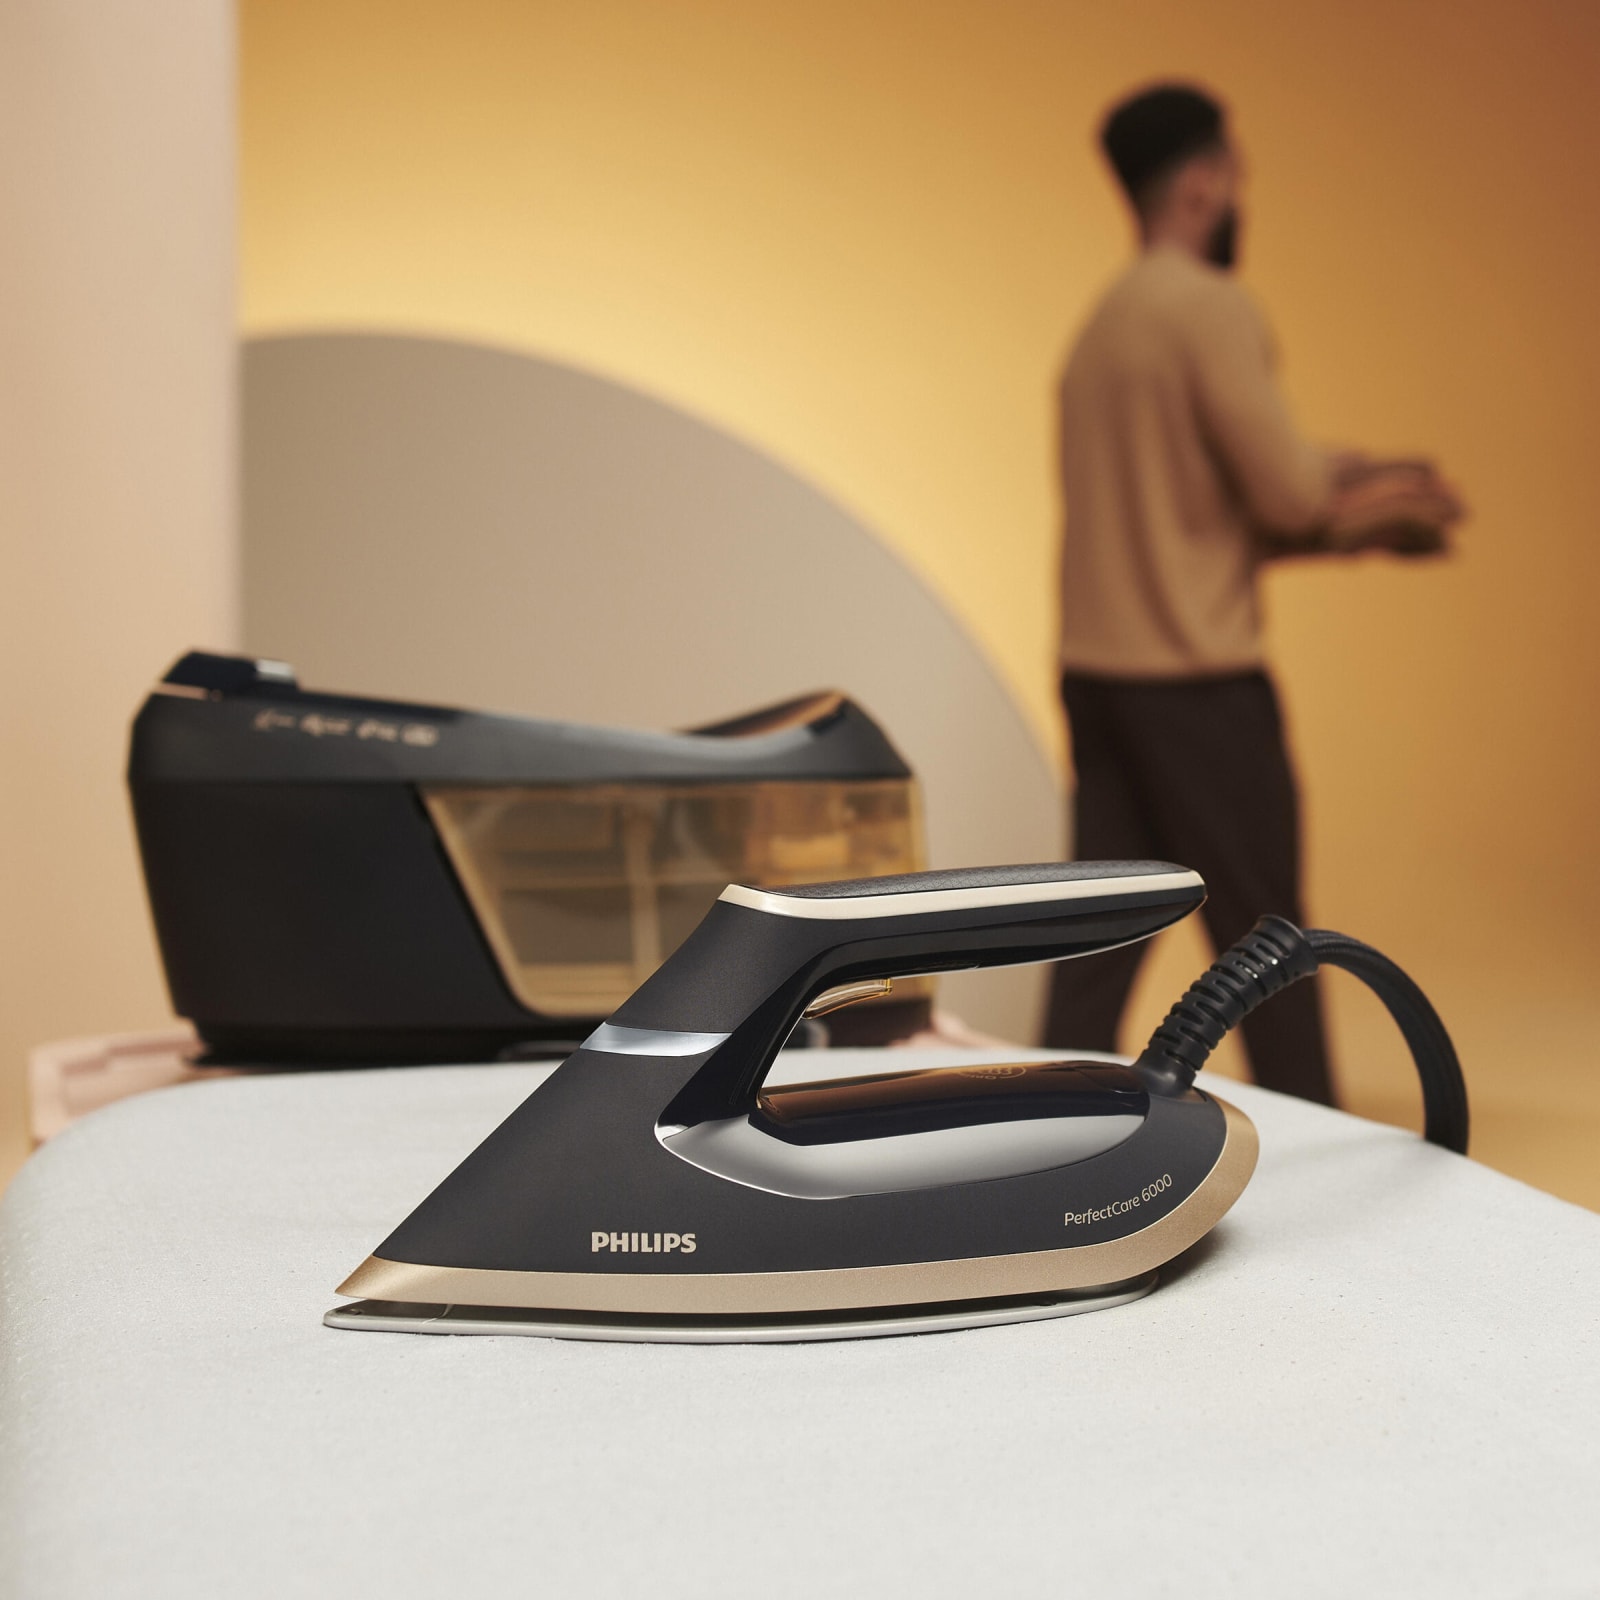 Red Dot Design Award: Philips Perfect Care Steam Generator 6000 Series